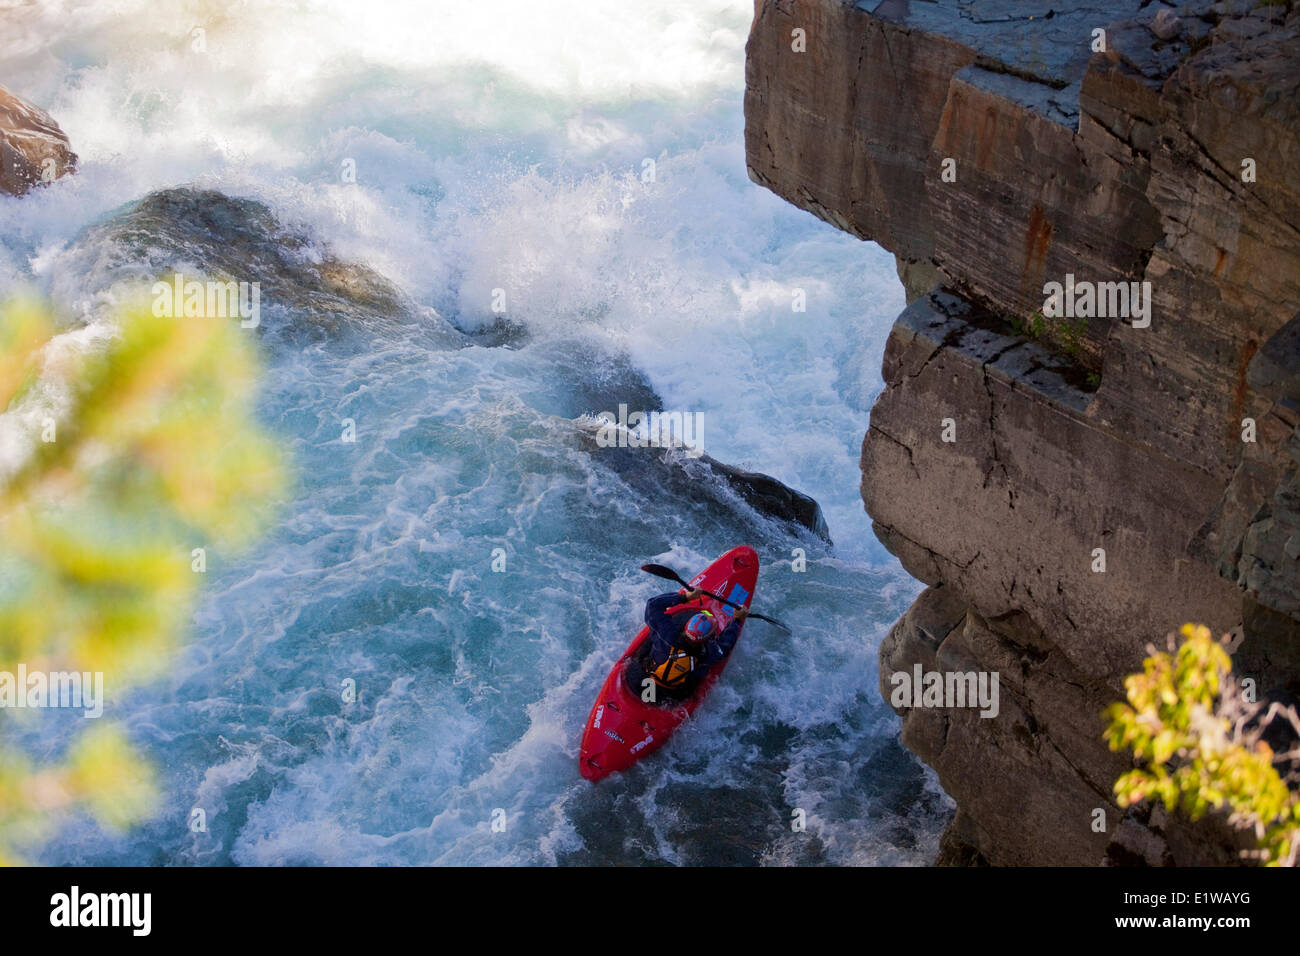 A male kayaker runs the challenging section of the Upper Elk River, Fernie, BC Stock Photo